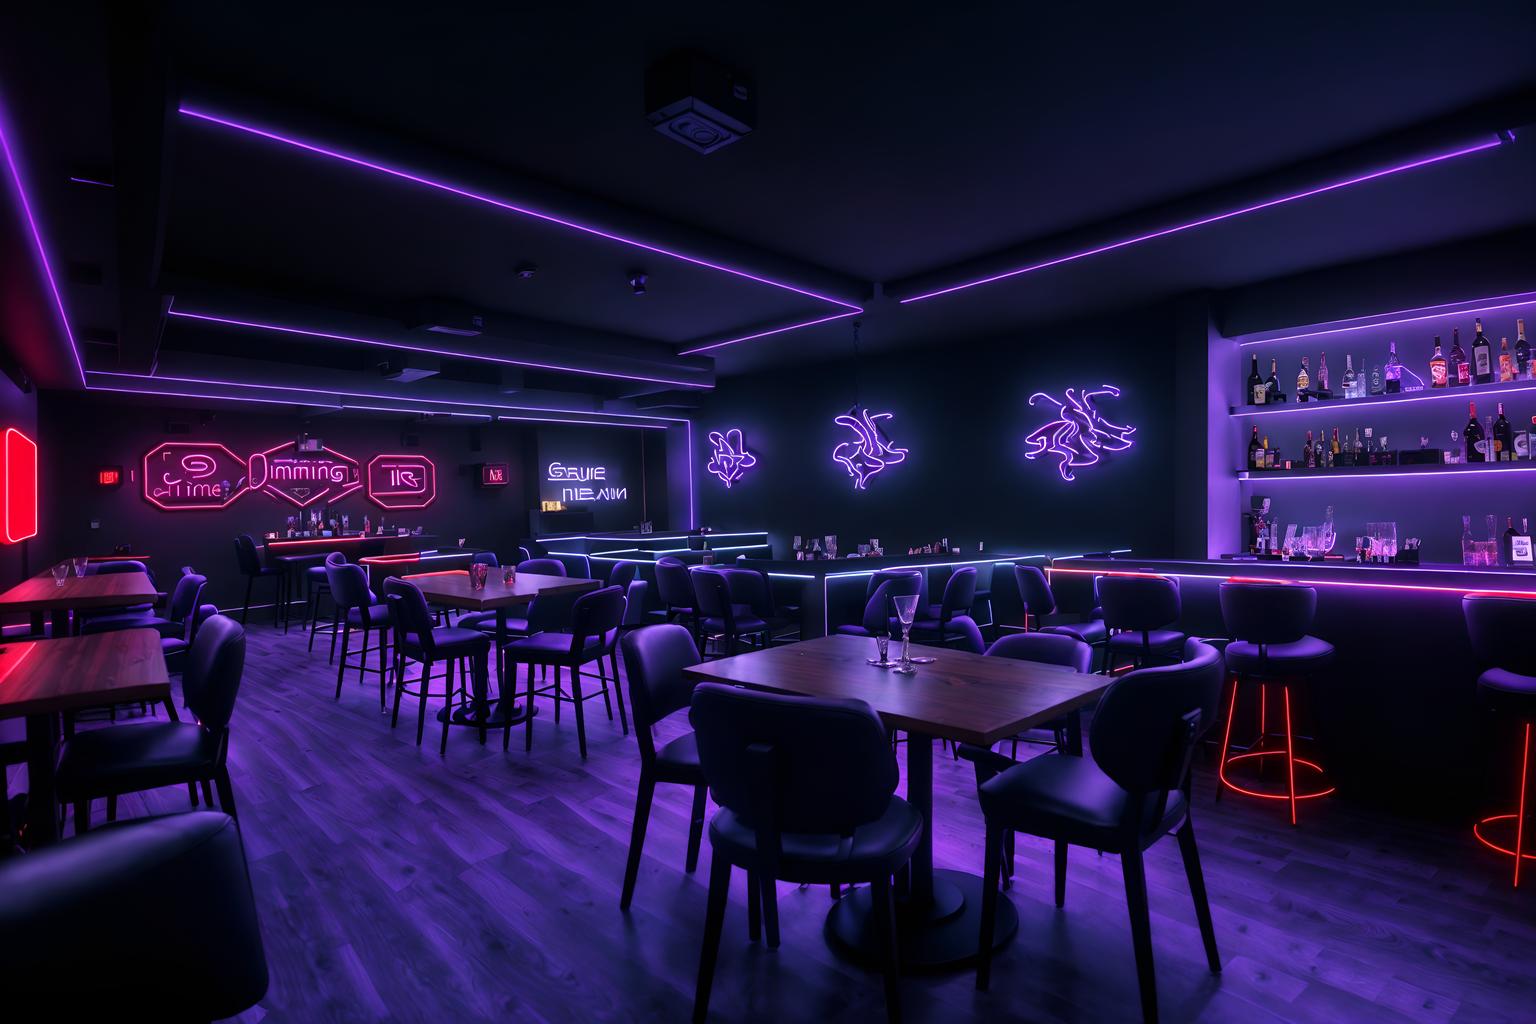 gaming room-style (restaurant interior) with restaurant bar and restaurant chairs and restaurant dining tables and restaurant decor and restaurant bar. . with dark room and neon lights and purple, red and blue fade light and at night and dark walls and speakers and gaming chair and computer desk with computer displays and keyboard. . cinematic photo, highly detailed, cinematic lighting, ultra-detailed, ultrarealistic, photorealism, 8k. gaming room interior design style. masterpiece, cinematic light, ultrarealistic+, photorealistic+, 8k, raw photo, realistic, sharp focus on eyes, (symmetrical eyes), (intact eyes), hyperrealistic, highest quality, best quality, , highly detailed, masterpiece, best quality, extremely detailed 8k wallpaper, masterpiece, best quality, ultra-detailed, best shadow, detailed background, detailed face, detailed eyes, high contrast, best illumination, detailed face, dulux, caustic, dynamic angle, detailed glow. dramatic lighting. highly detailed, insanely detailed hair, symmetrical, intricate details, professionally retouched, 8k high definition. strong bokeh. award winning photo.